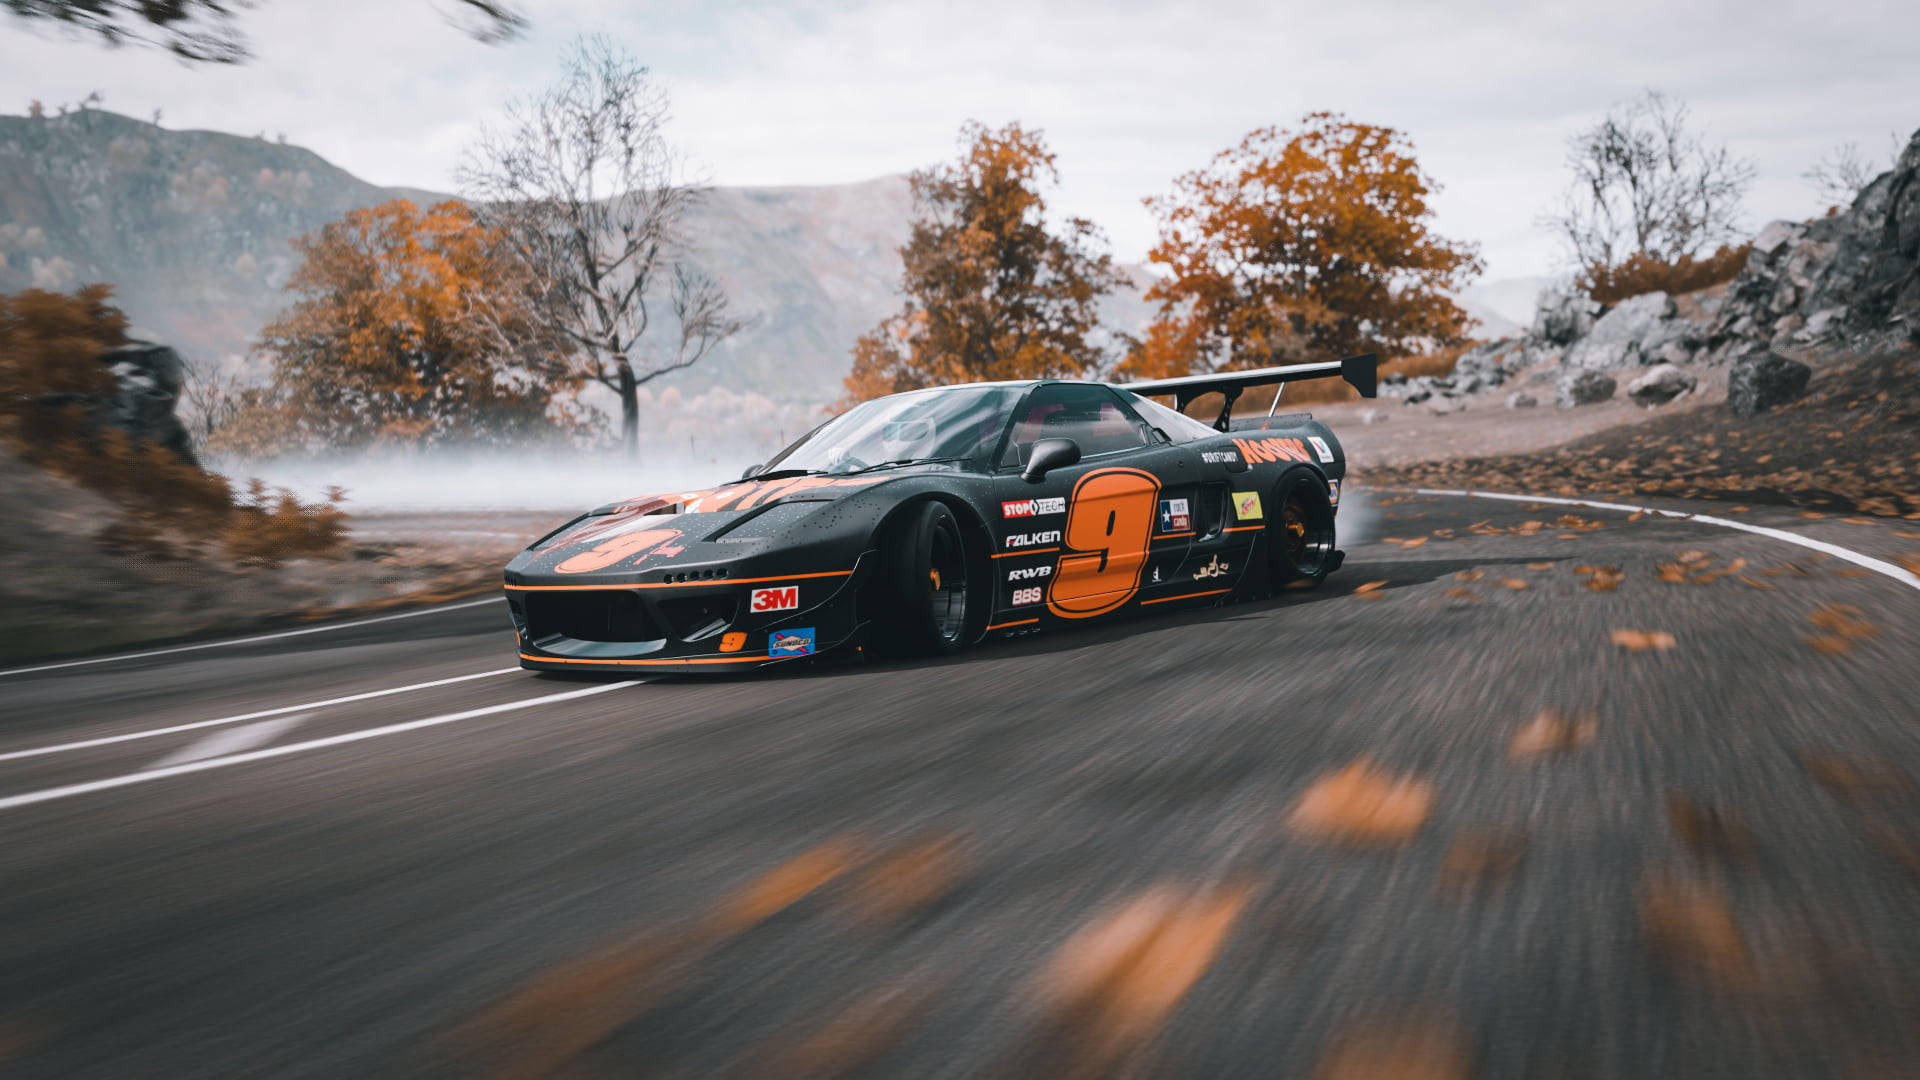 Caption: Stunning Orange And Black Honda Nsx Excelling In Drift Racing